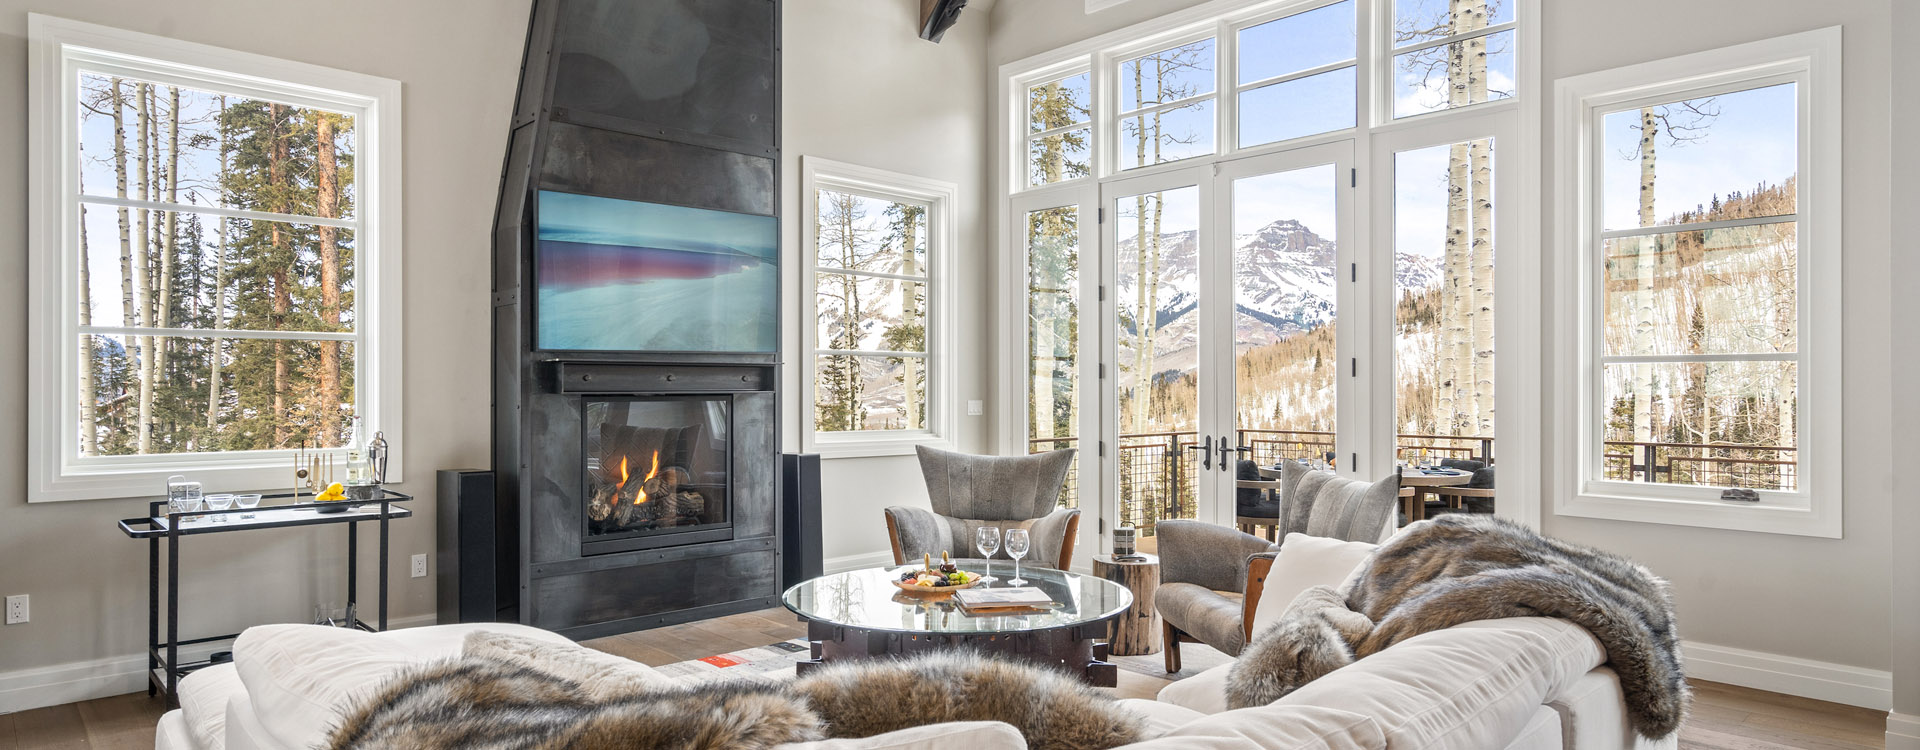 2.04-Fire-and-Ice-Mountain-Village-Vacation-Rental-Living-Room-12